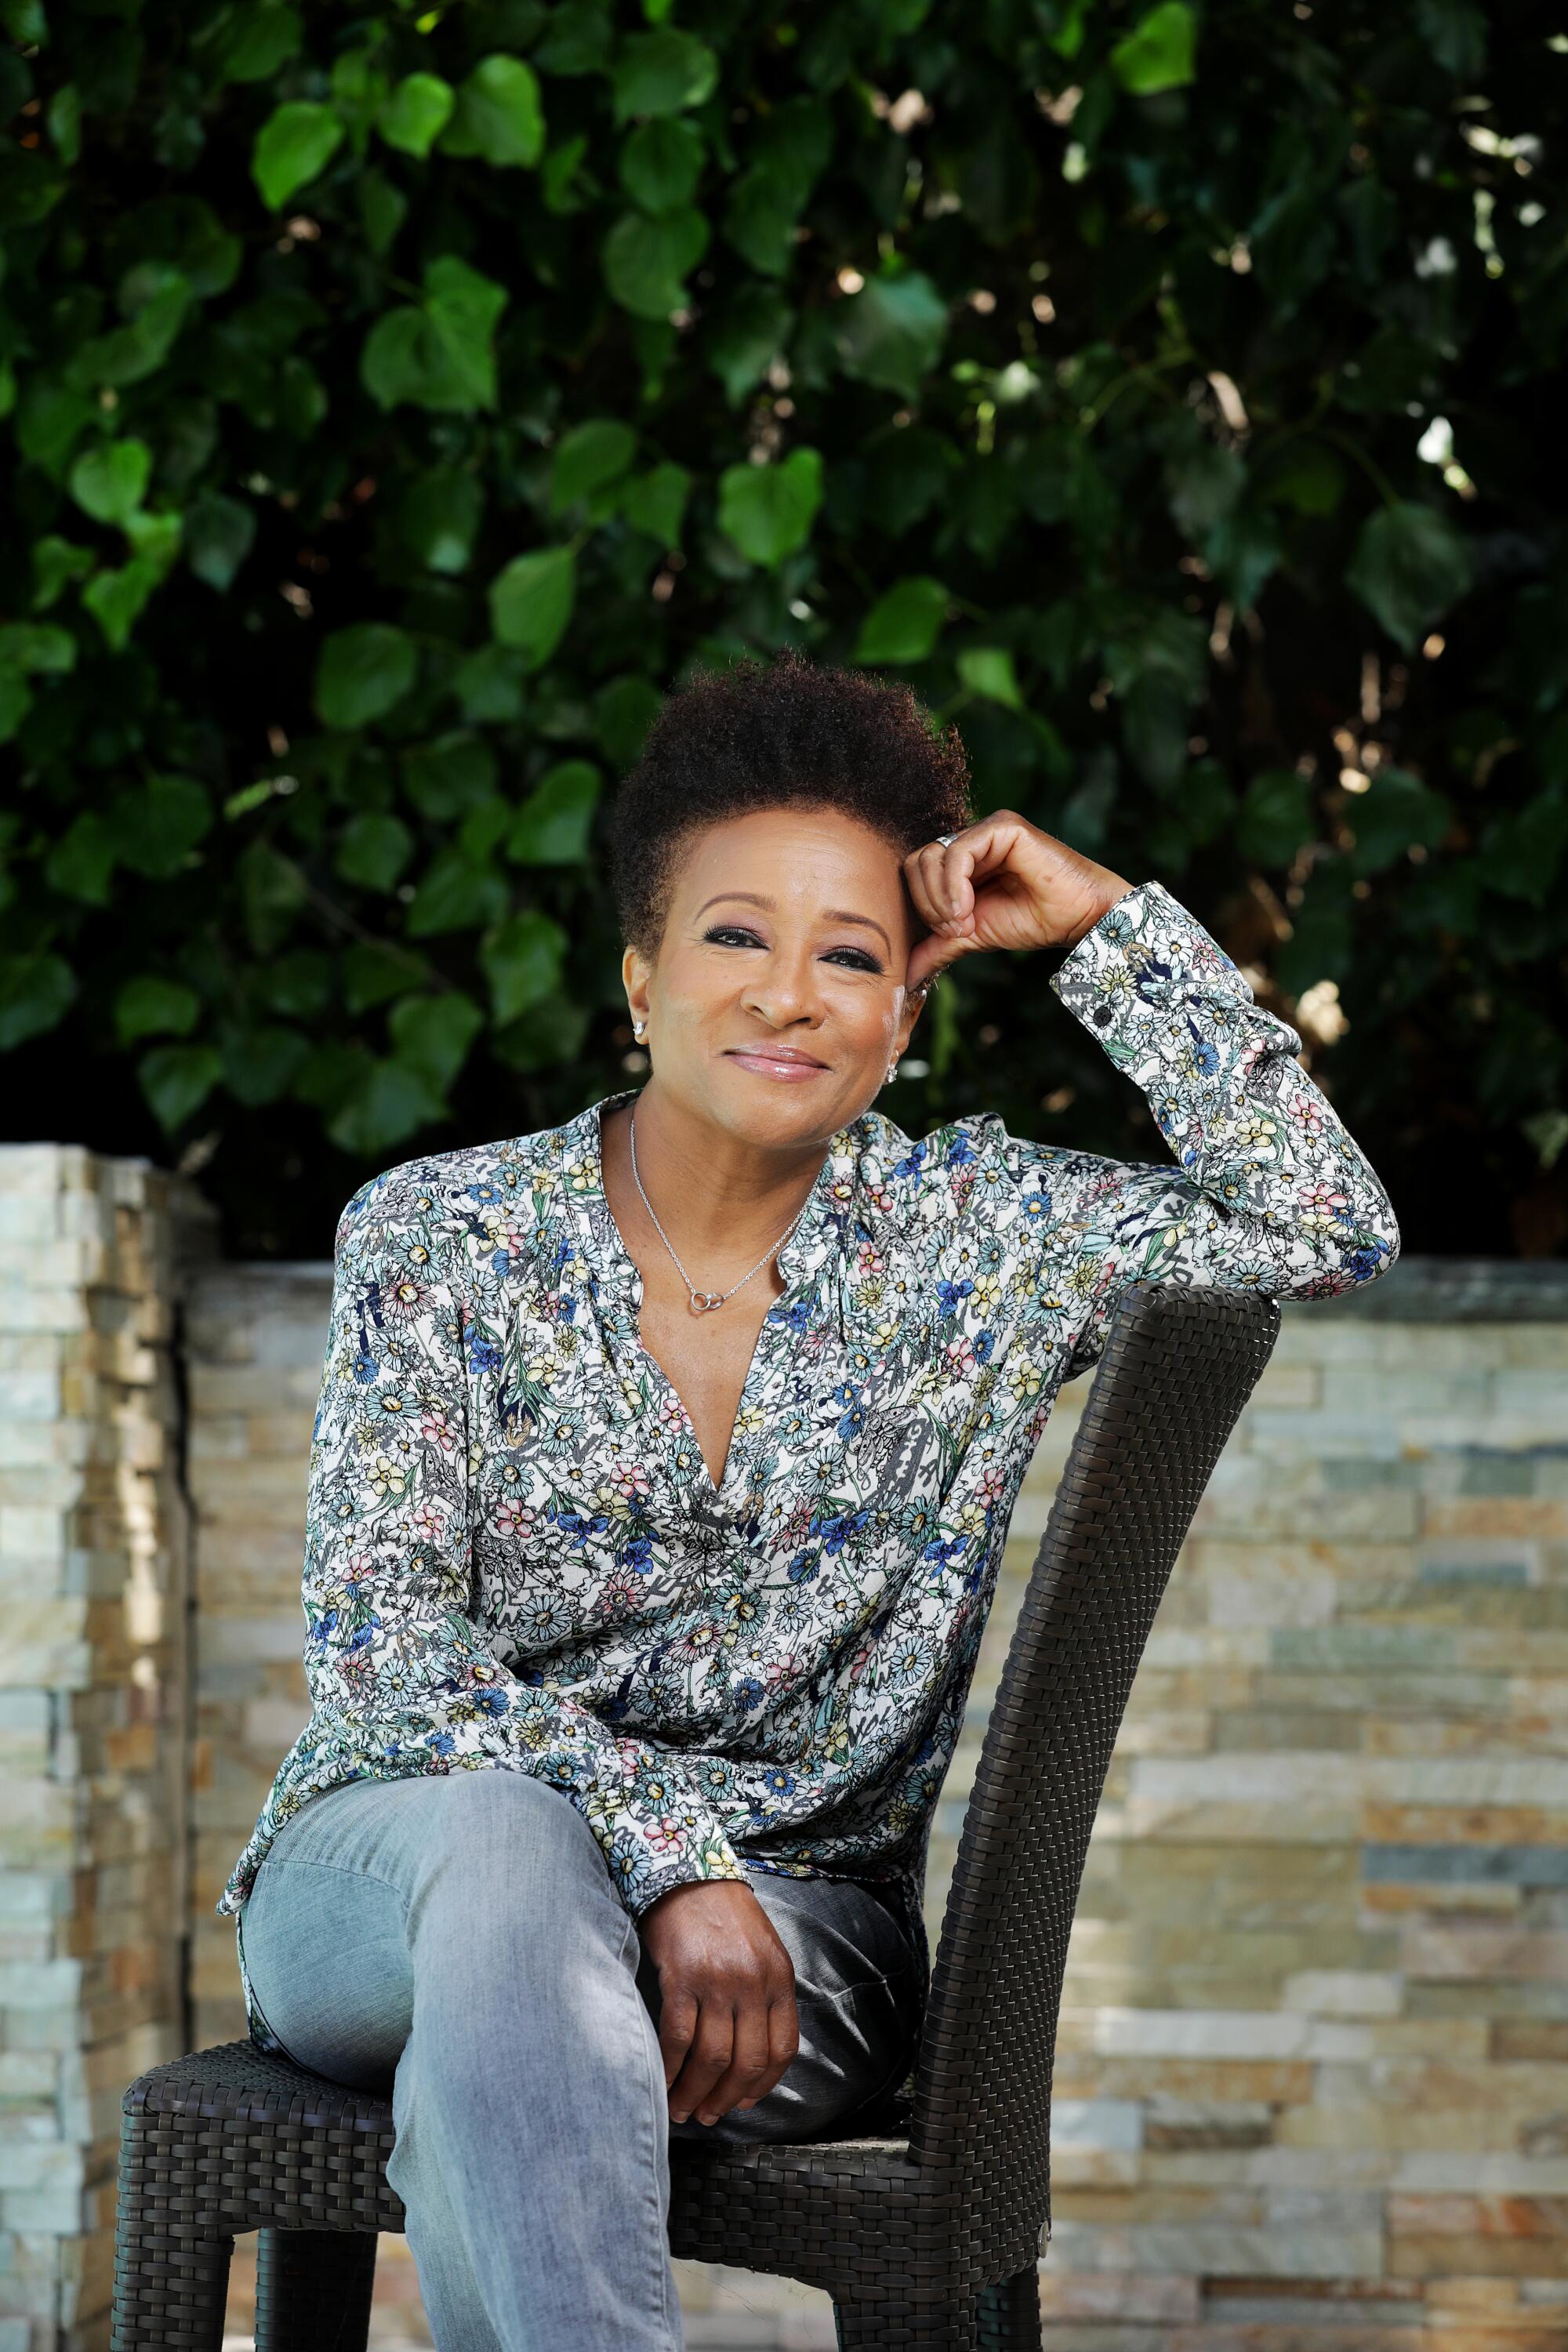 Actress Wanda Sykes is photographed at home in Los Angeles.